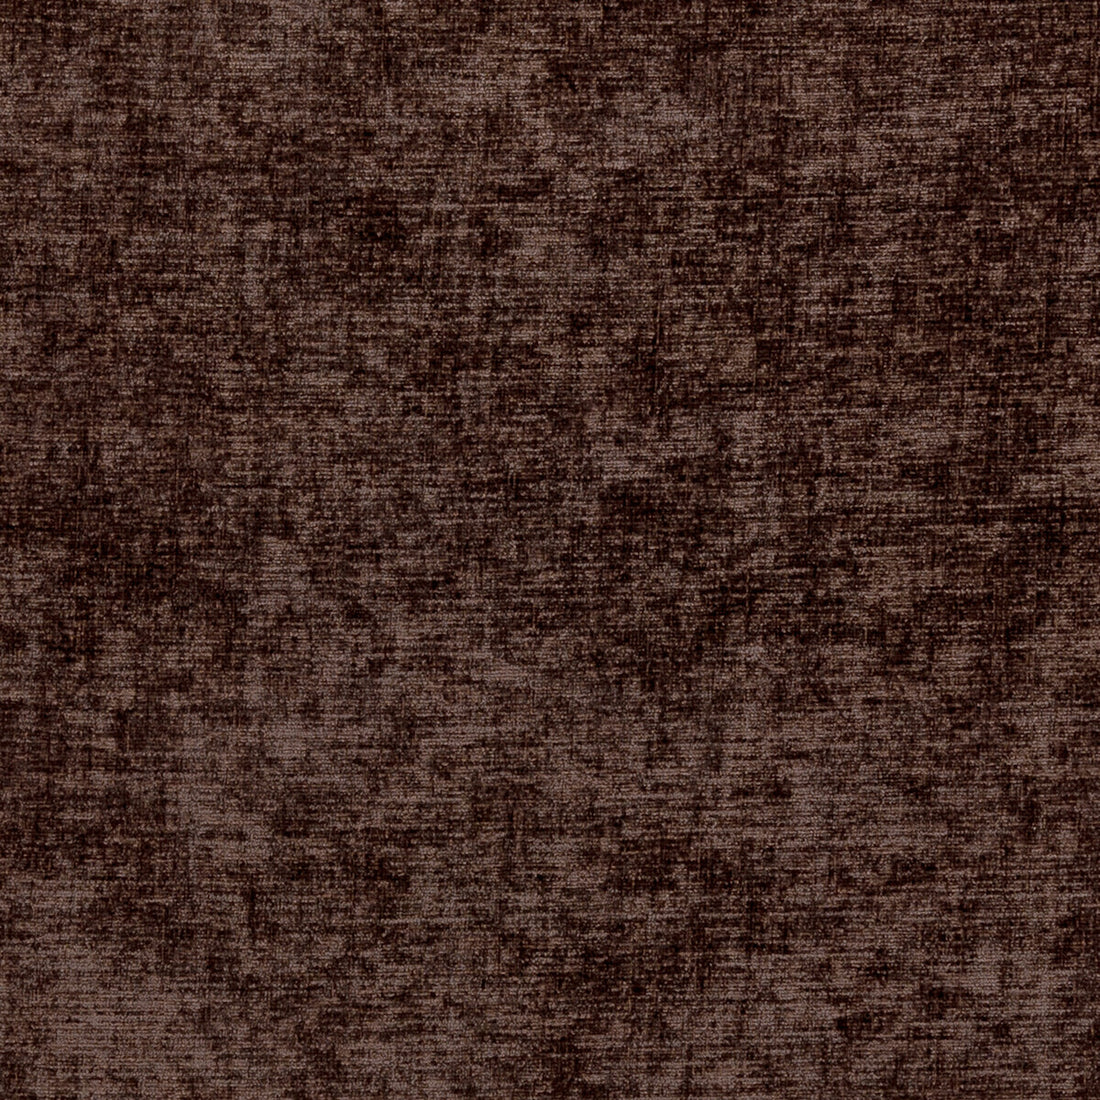 Karina fabric in espresso color - pattern F0371/14.CAC.0 - by Clarke And Clarke in the Clarke &amp; Clarke Karina collection